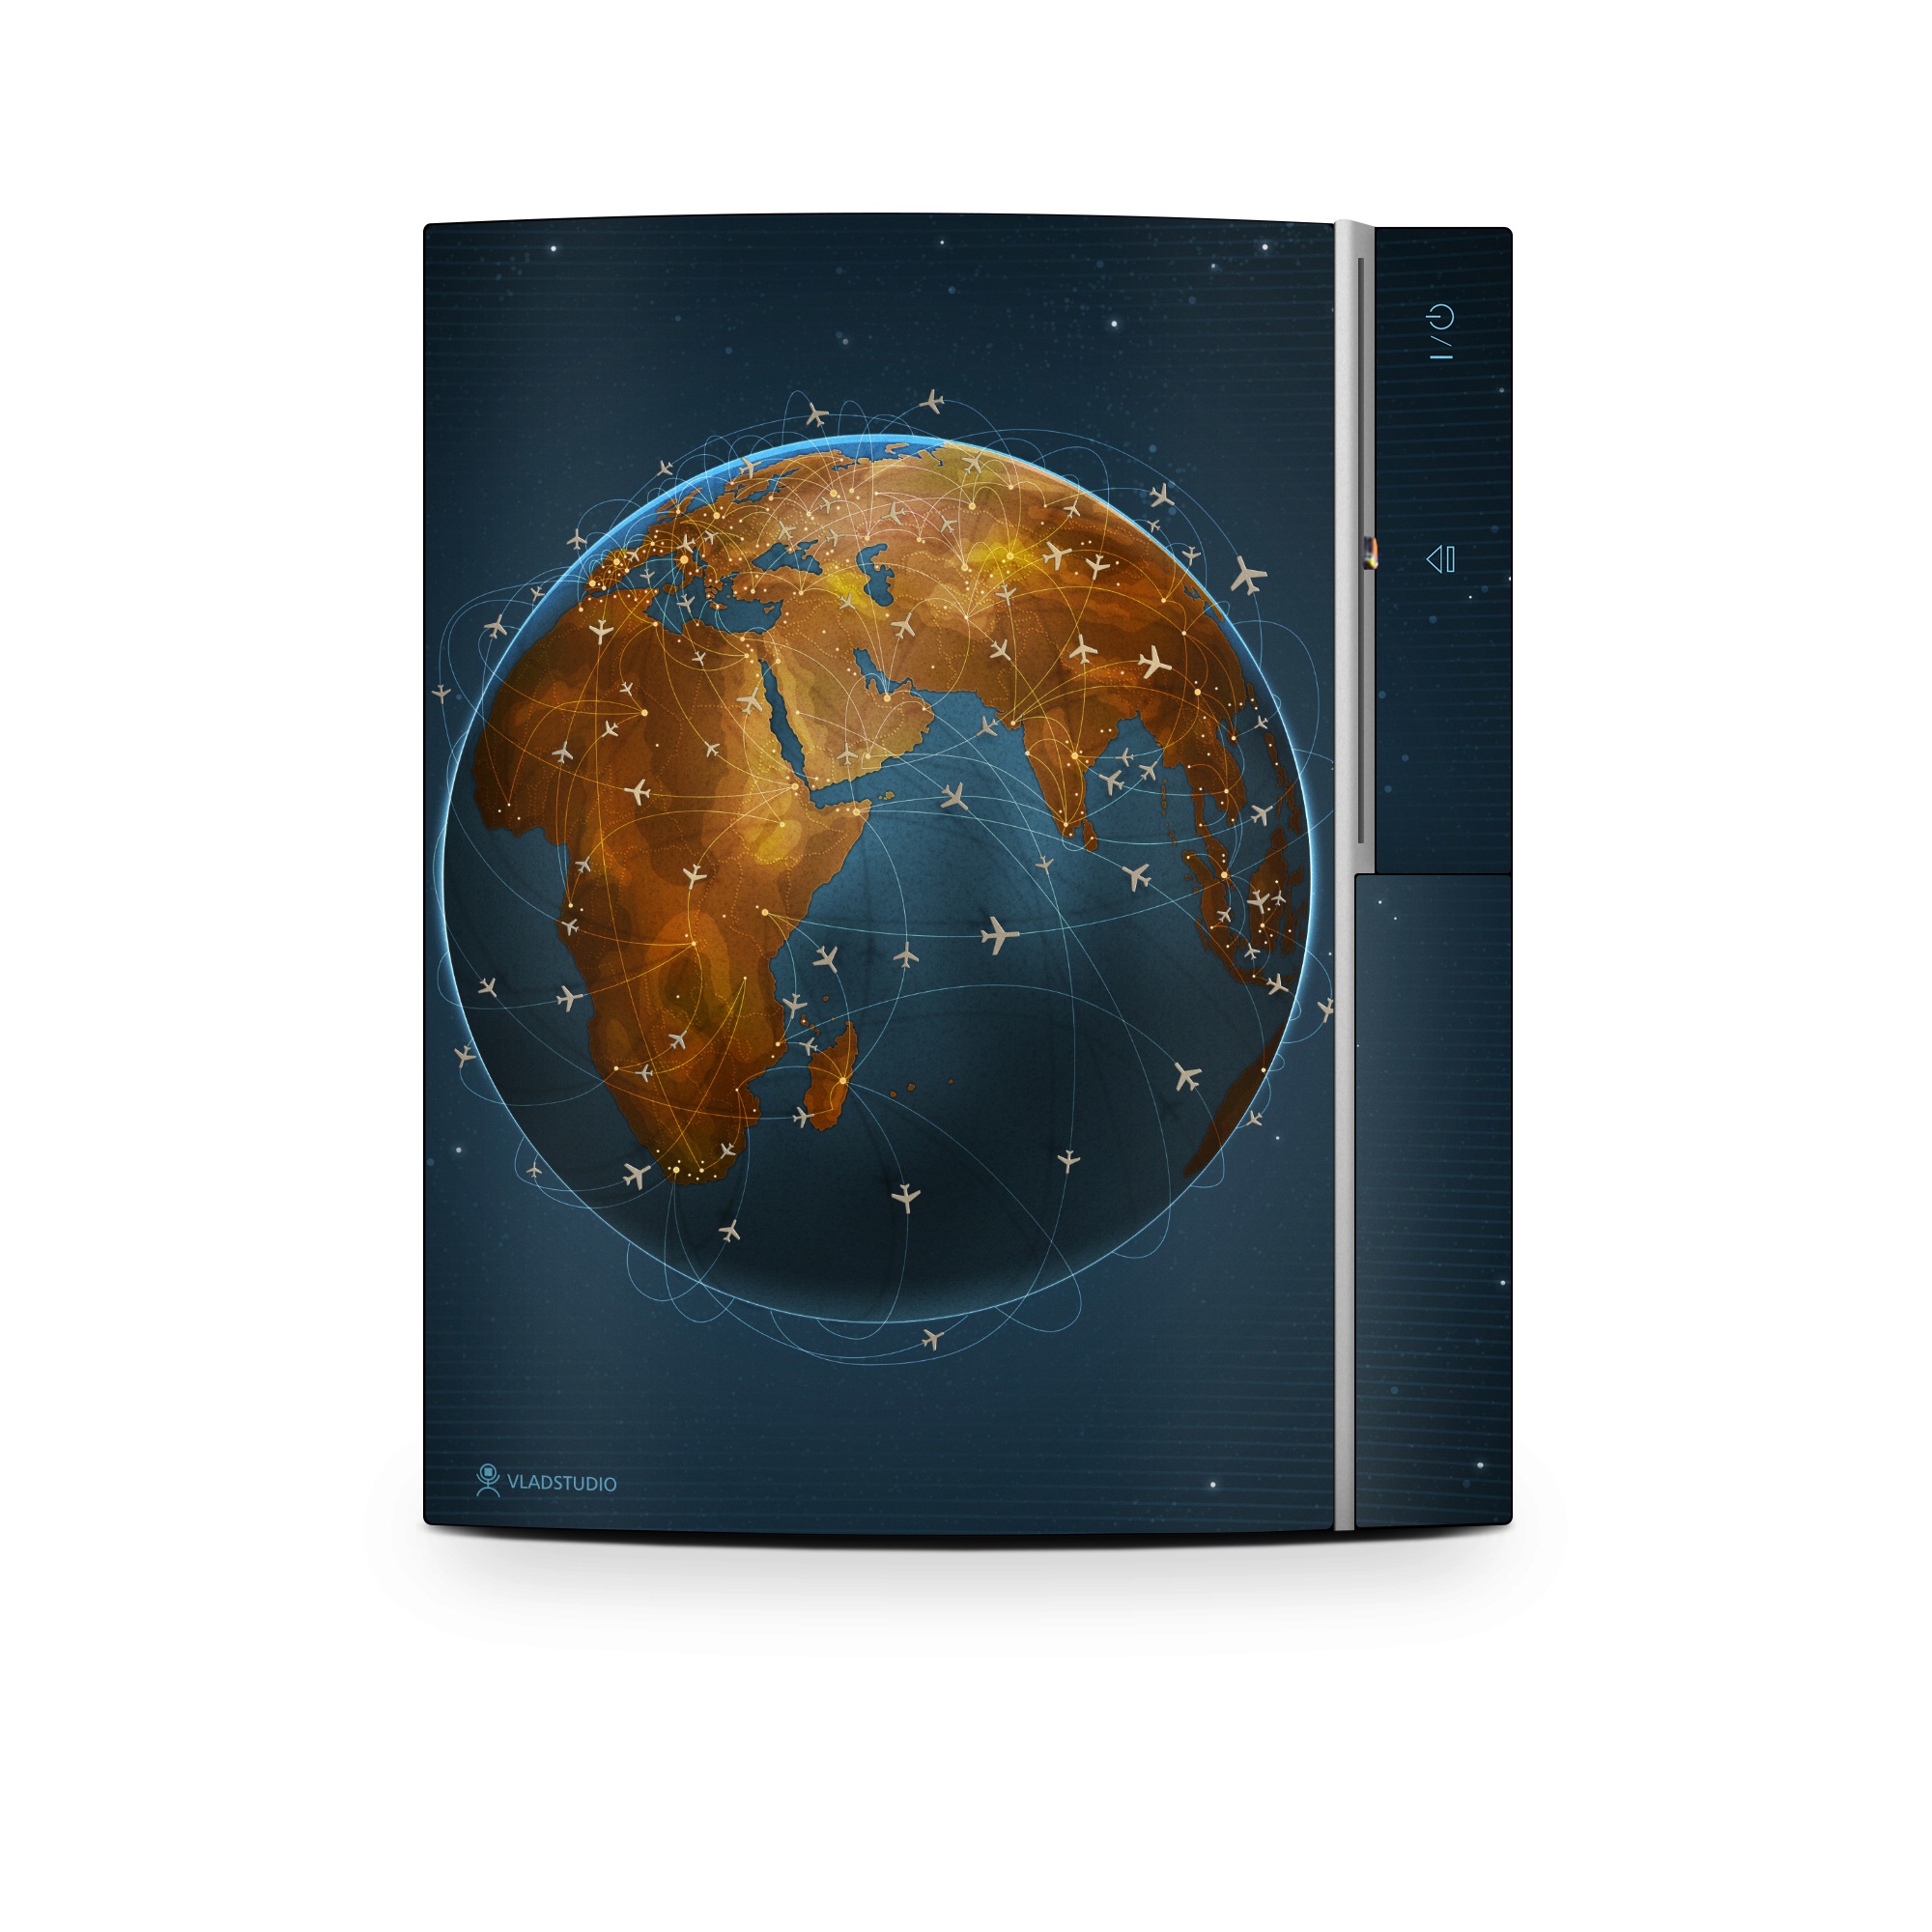 Old PS3 Skin design of Planet, Earth, Astronomical object, World, Atmosphere, Globe, Space, Sky, Astronomy, Circle, with blue, yellow, brown colors